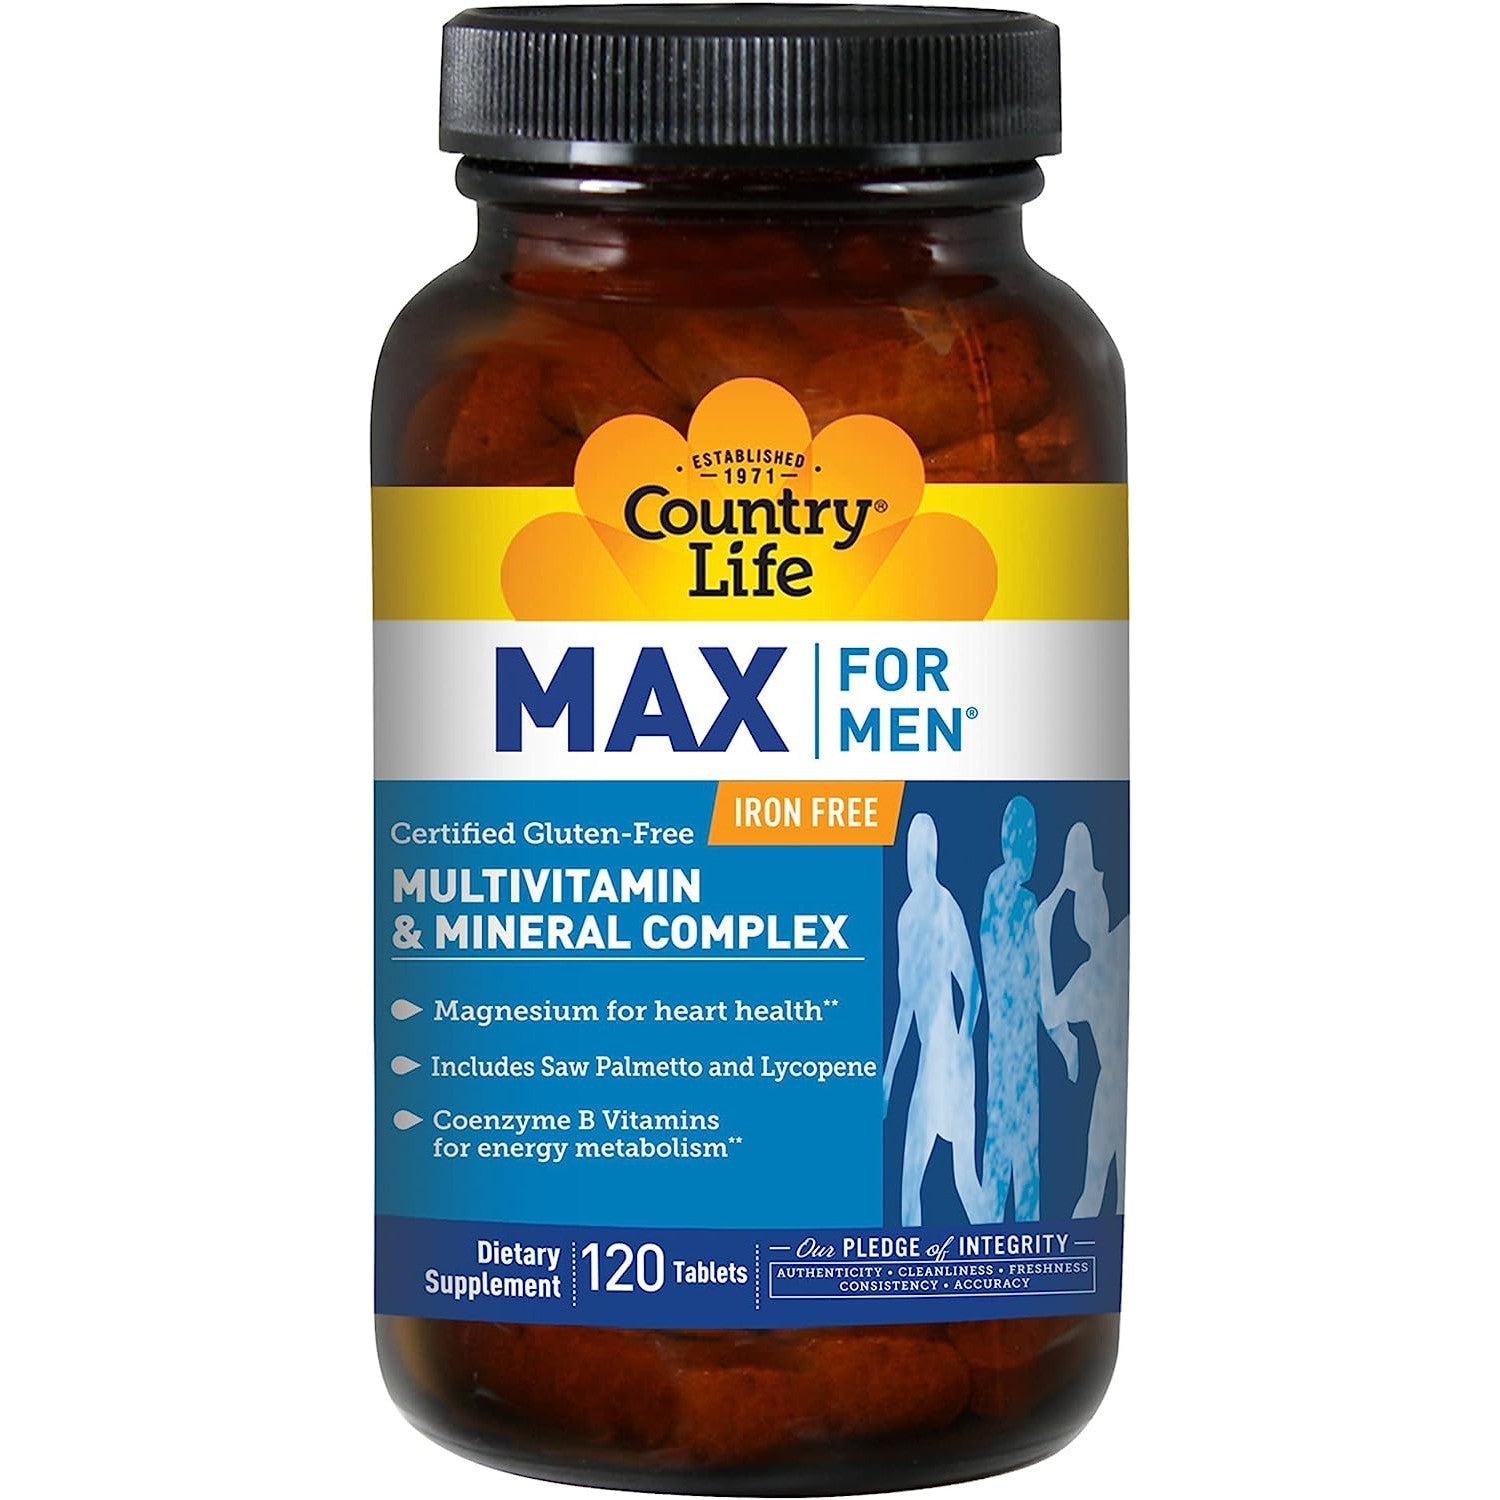 Country Life Max for Men Multivitamin & Mineral Complex Iron Free with Saw Palmetto Gluten Free 120 Tablet